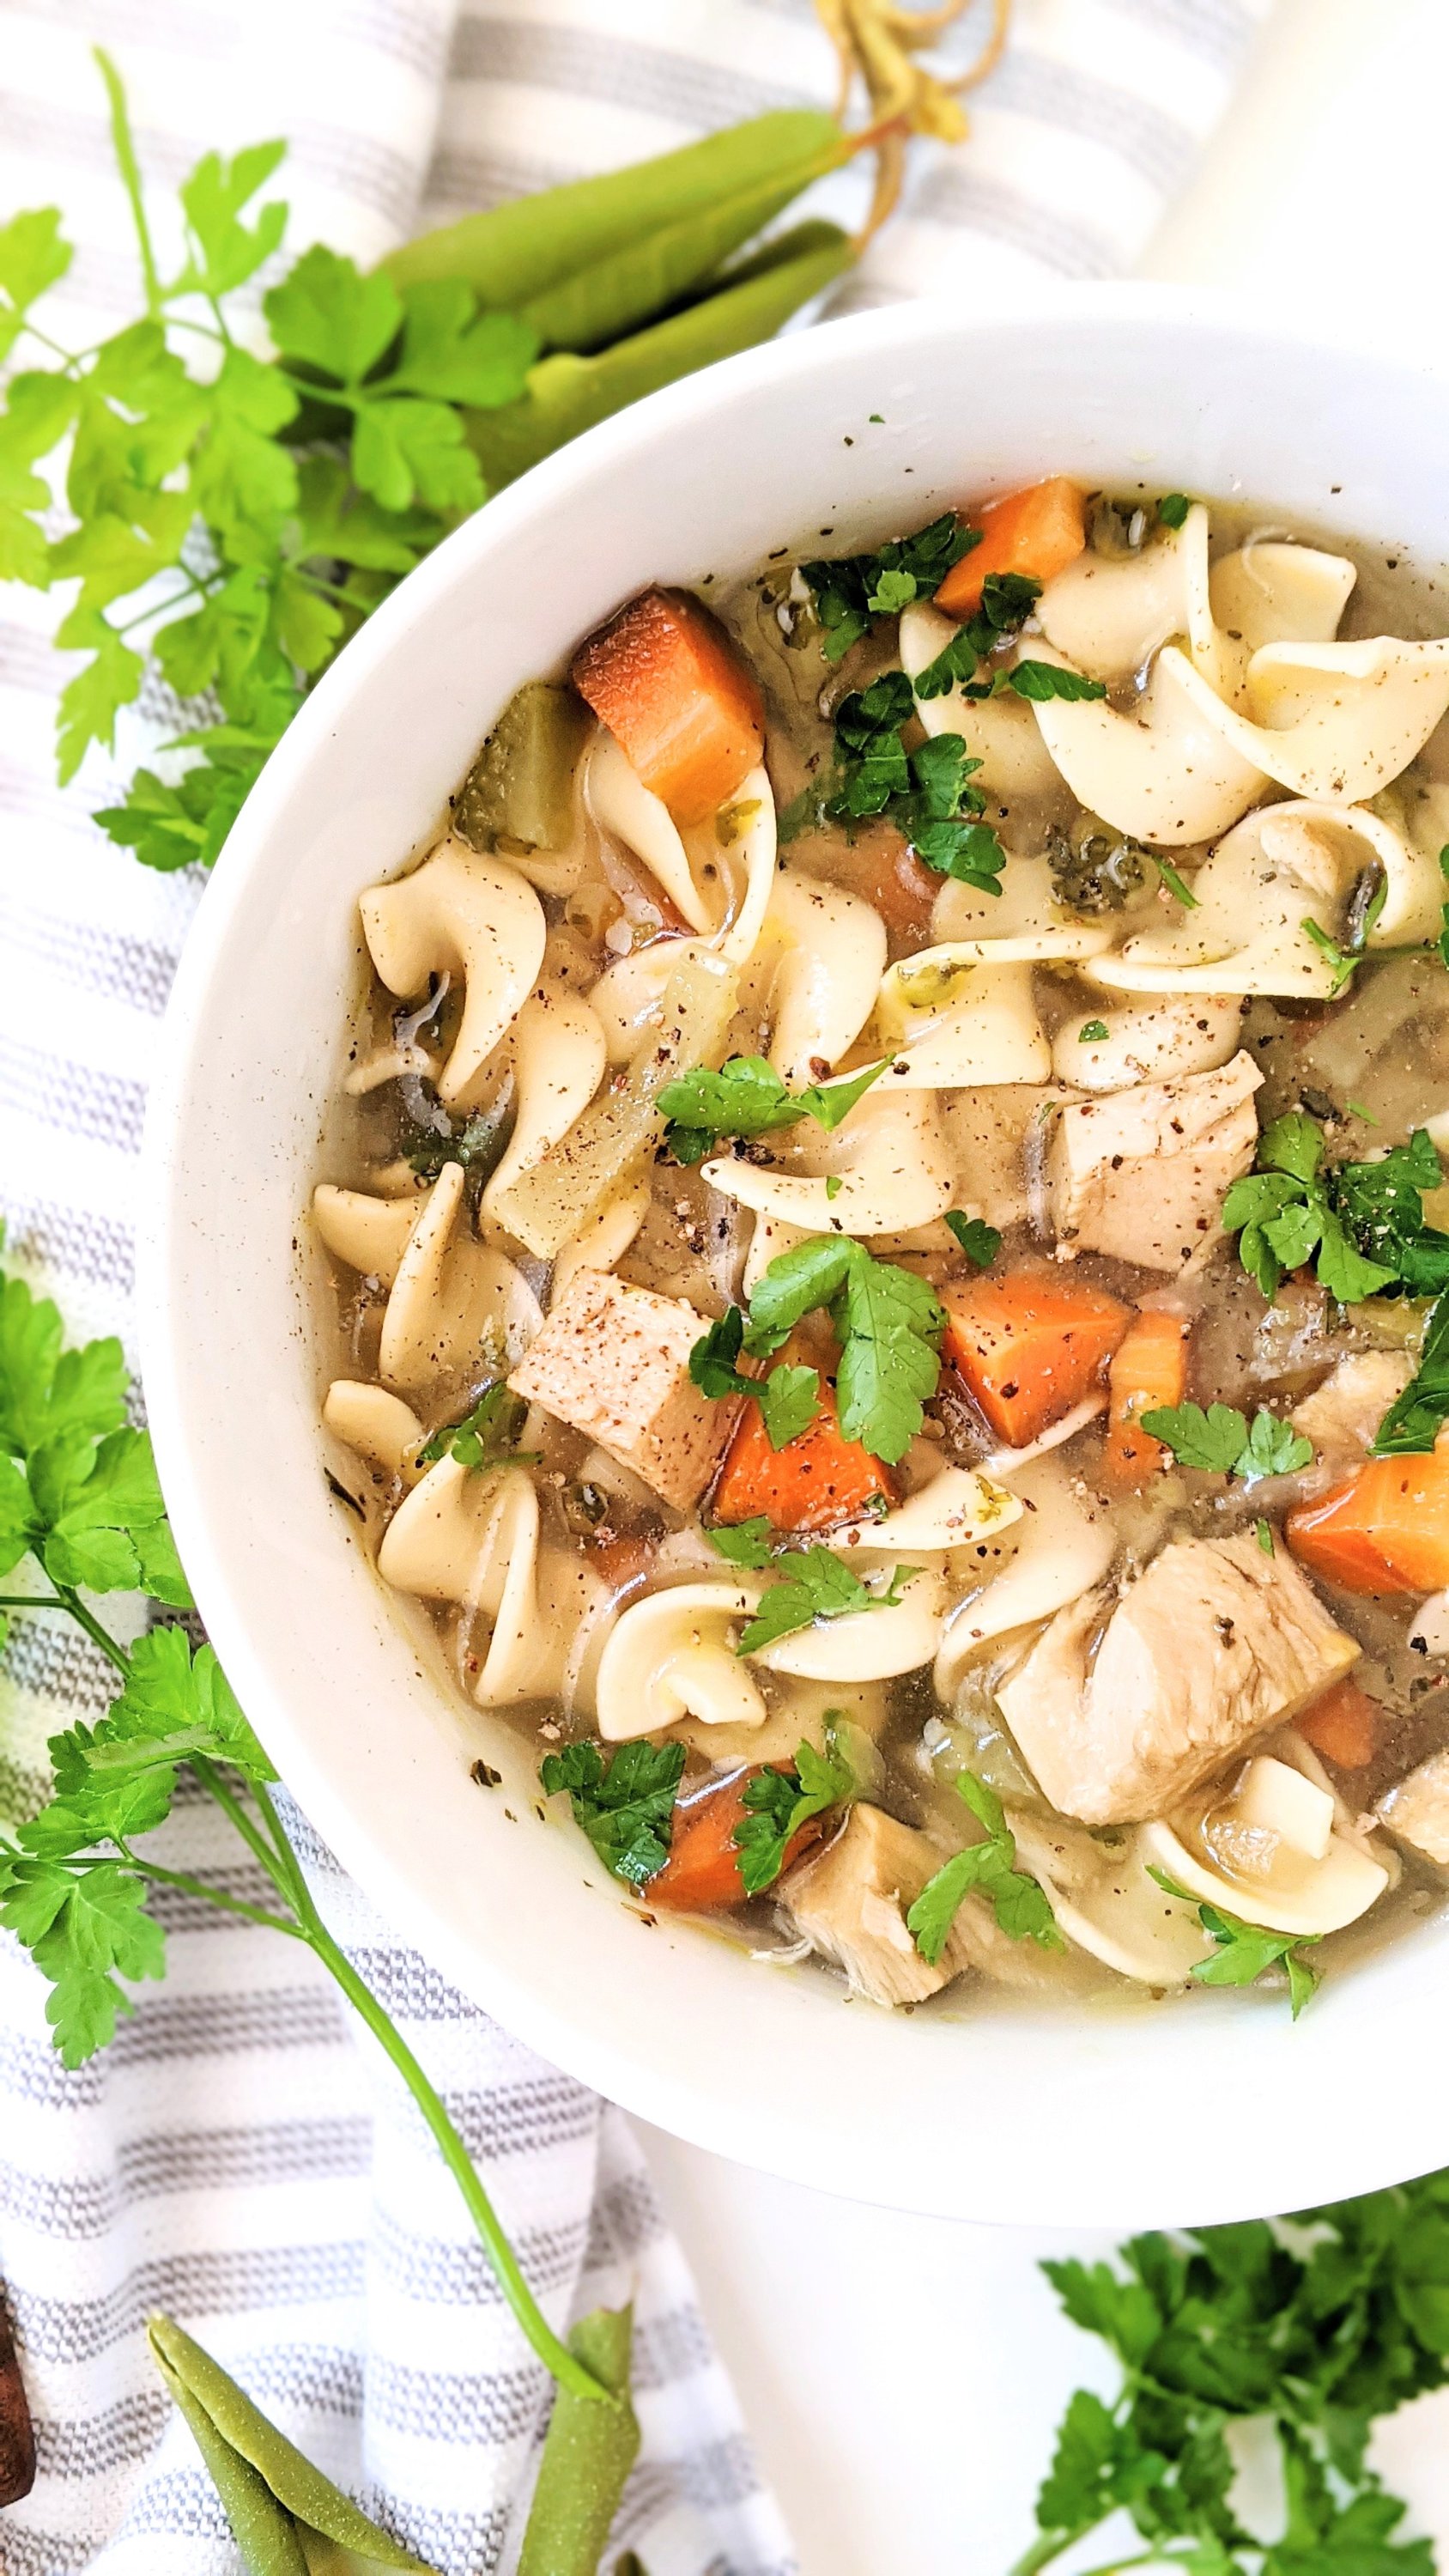 classic turkey noodle soup recipe gluten free dairy free soup recipes with leftover turkey thanksgiving leftover soup turkey noodle with gluten free egg noodles broad noodles